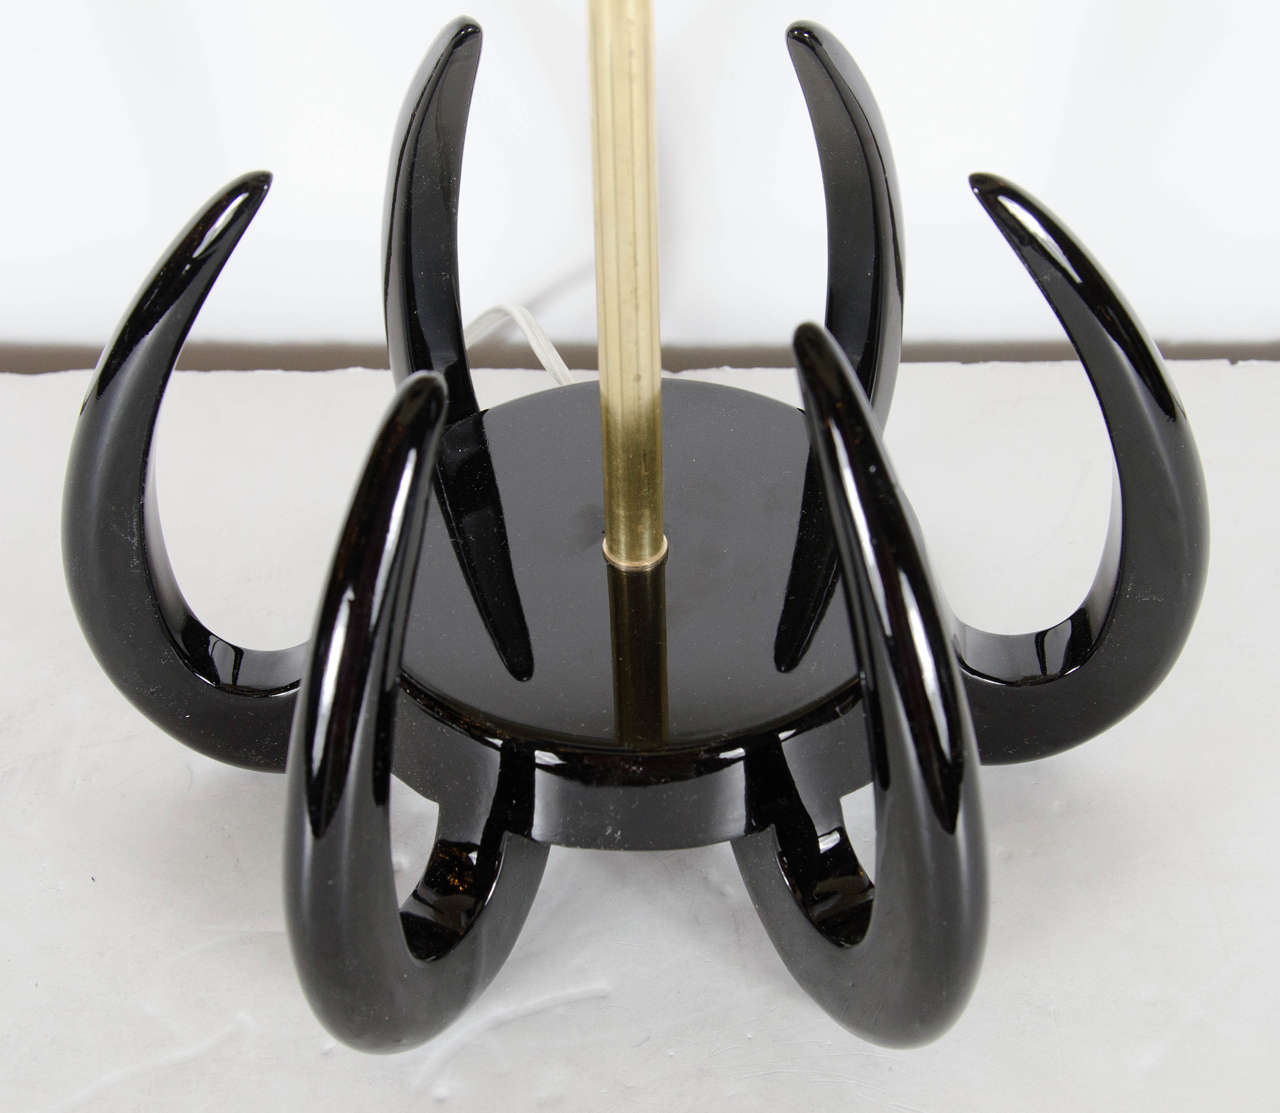 Sophisticated Pair of Sculptural Mid-Century Modern in Ebonized Walnut and Brass 1